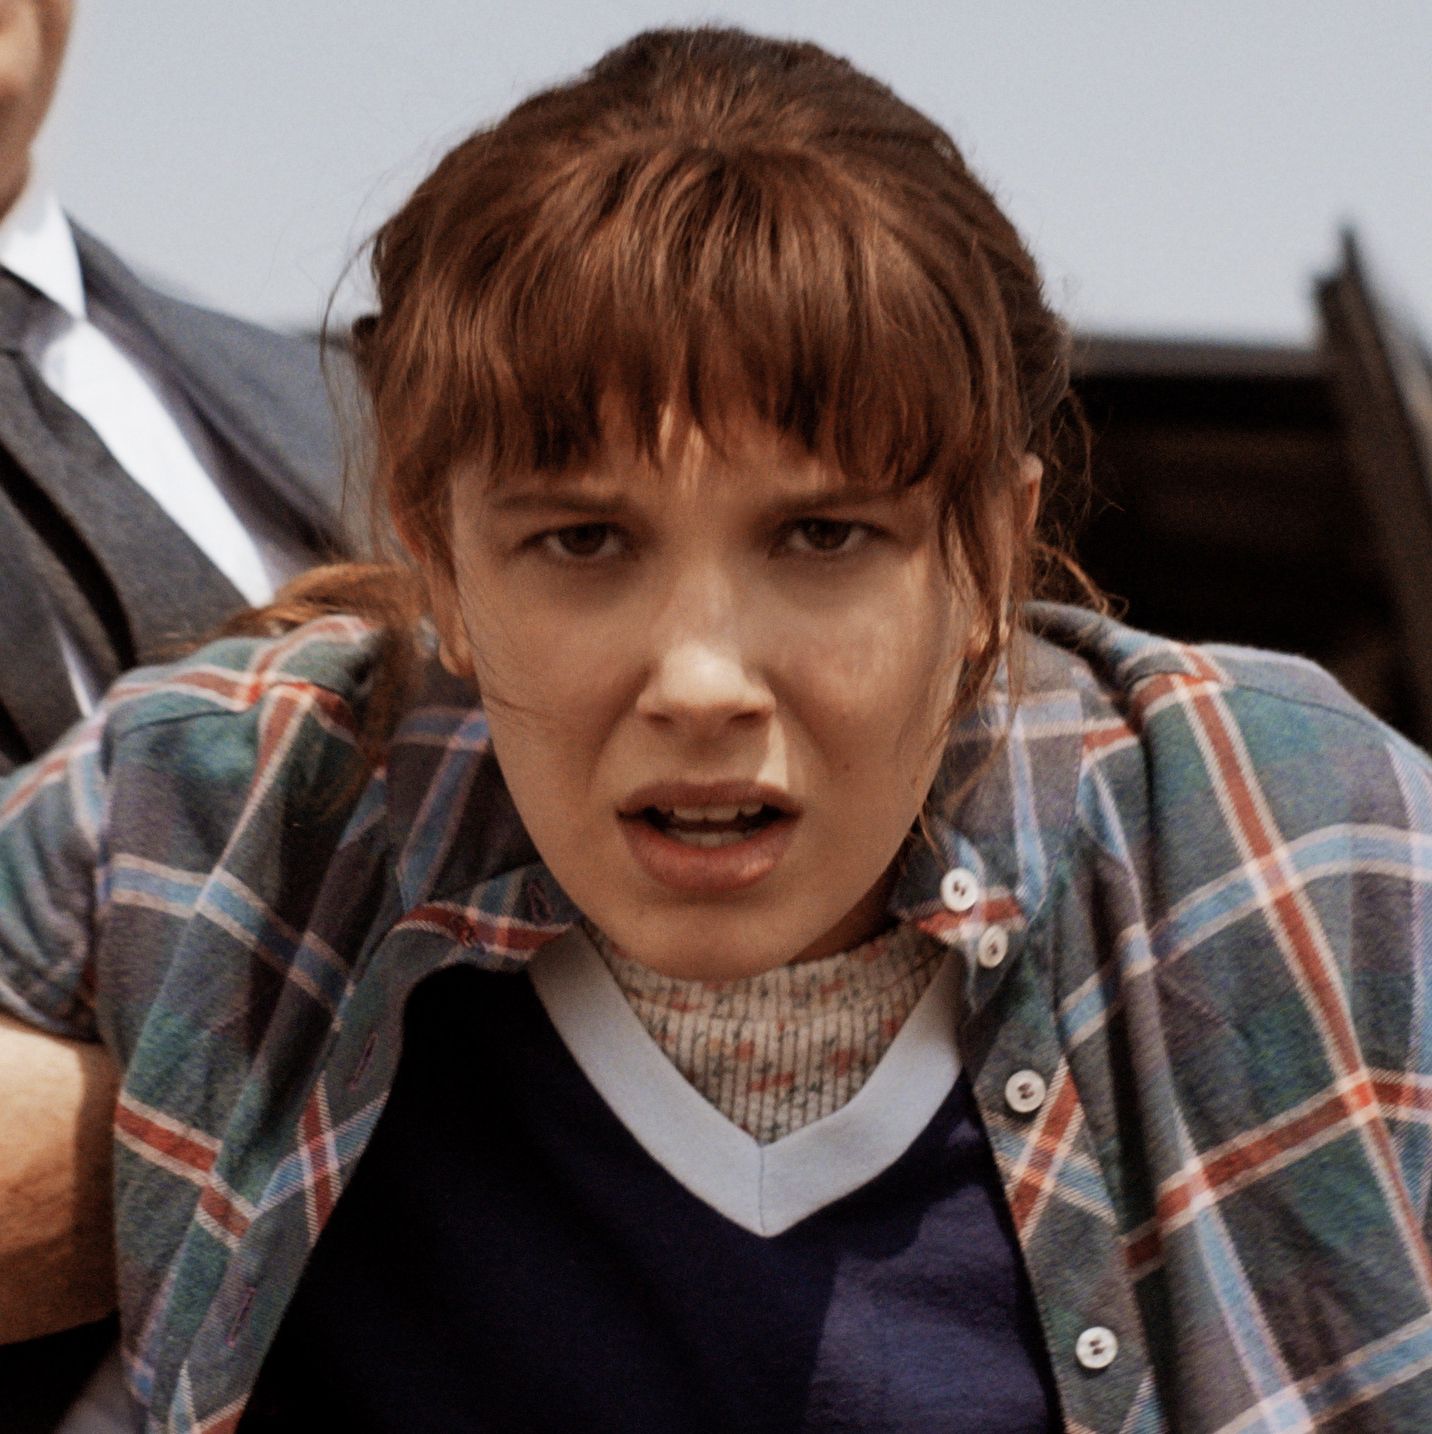 'Stranger Things' Fans Are All Tweeting the Exact Same Thing About Millie Bobby Brown RN